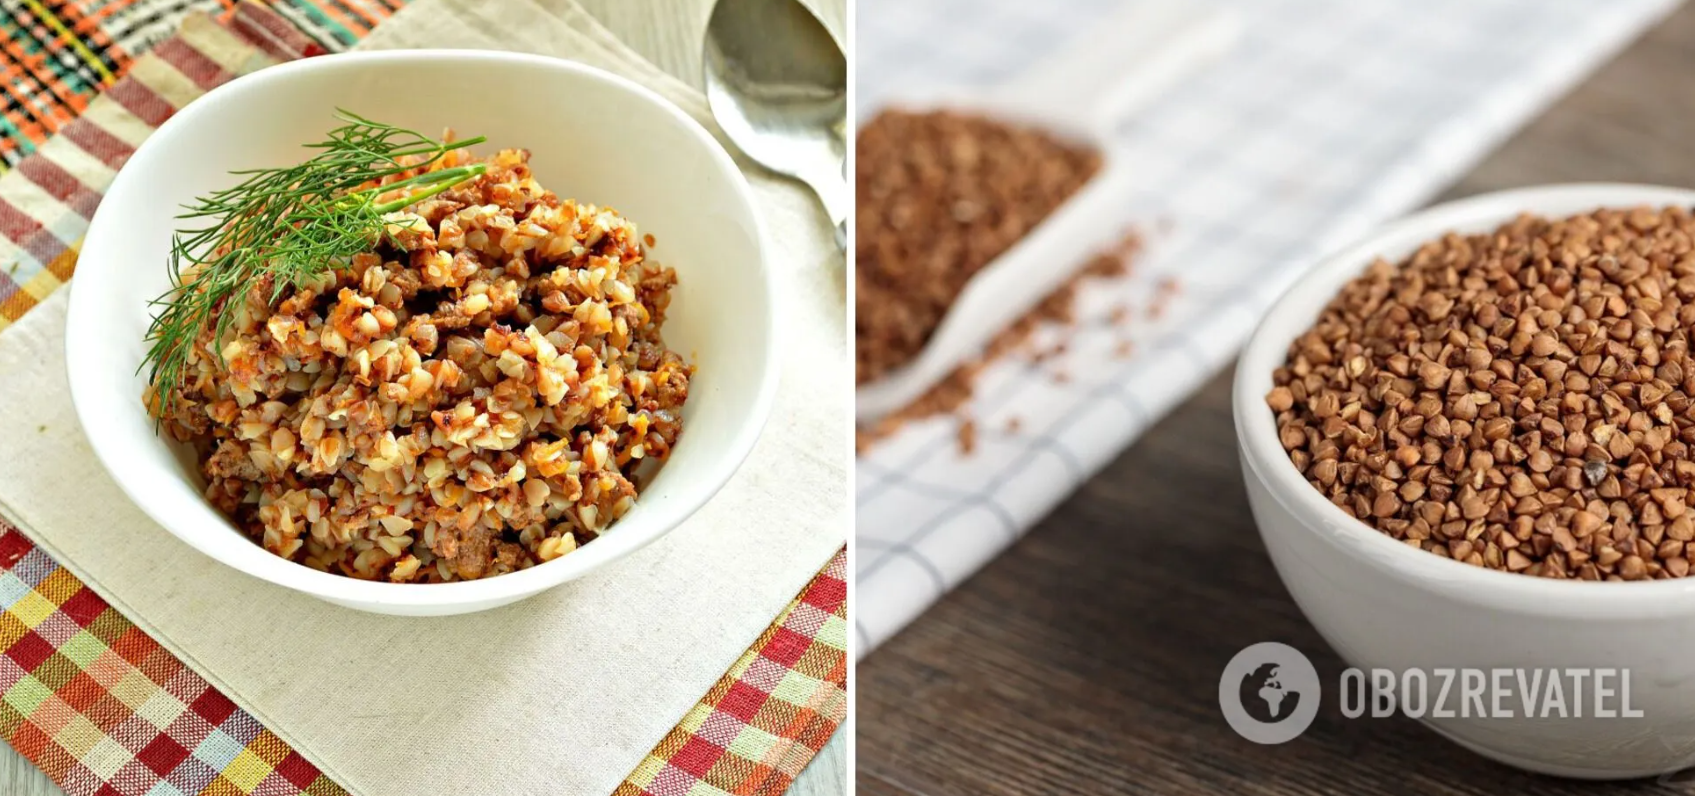 What to cook with buckwheat